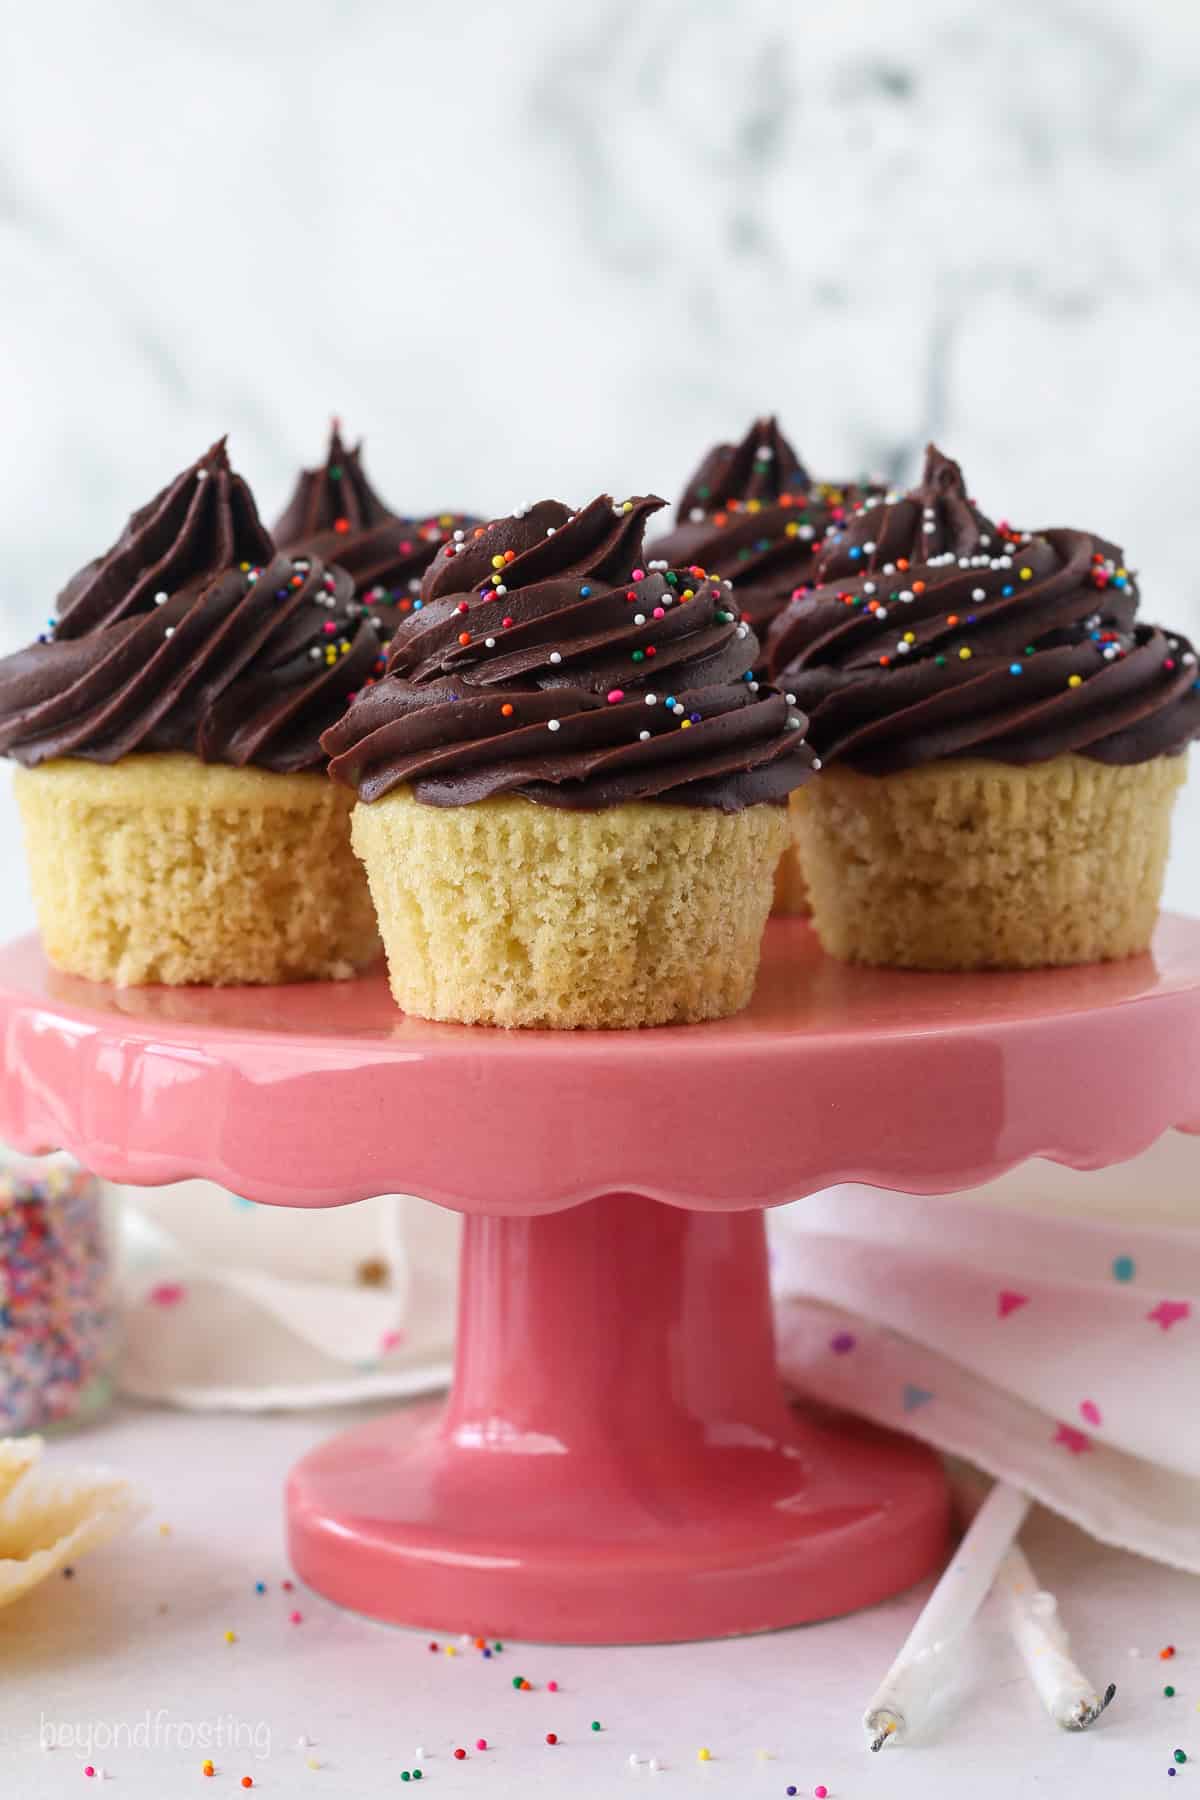 Yellow cupcakes topped with chocolate frosting swirls on a pink cake stand.